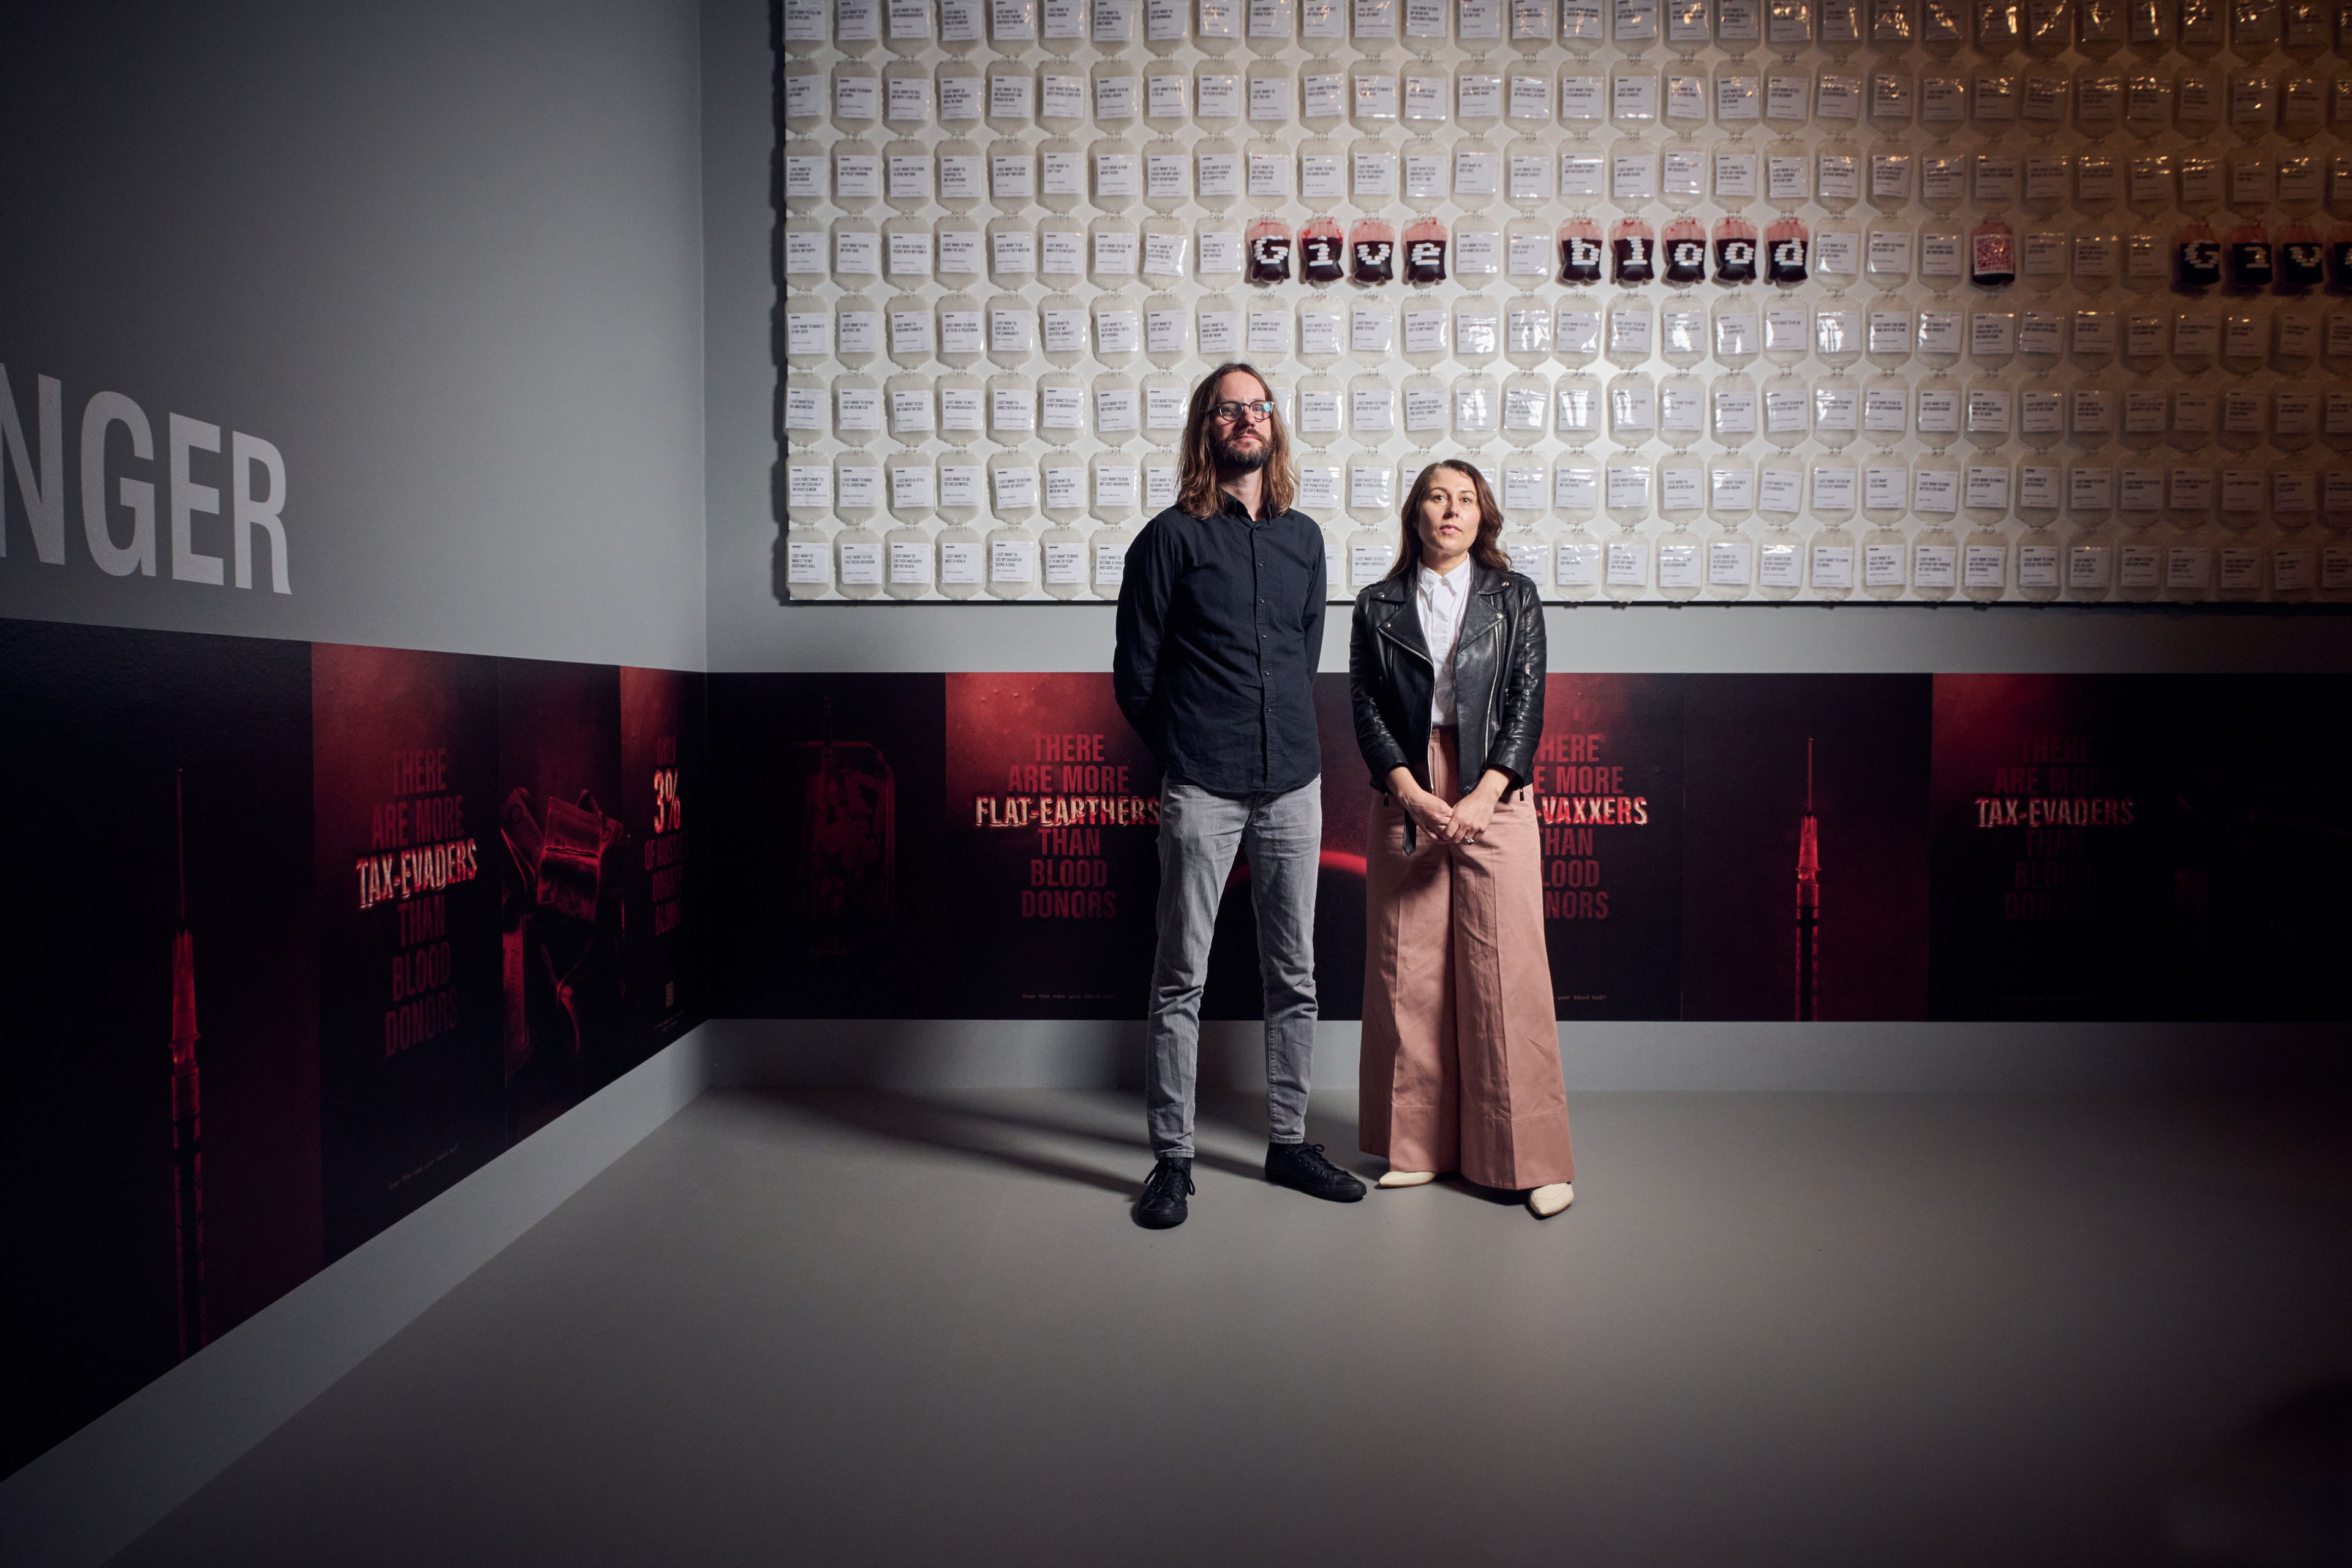 Can creativity make you bleed? by Leo Burnett Australia wins the NGV’s $30,000 Rigg Design Prize, one of Australia’s highest design accolades